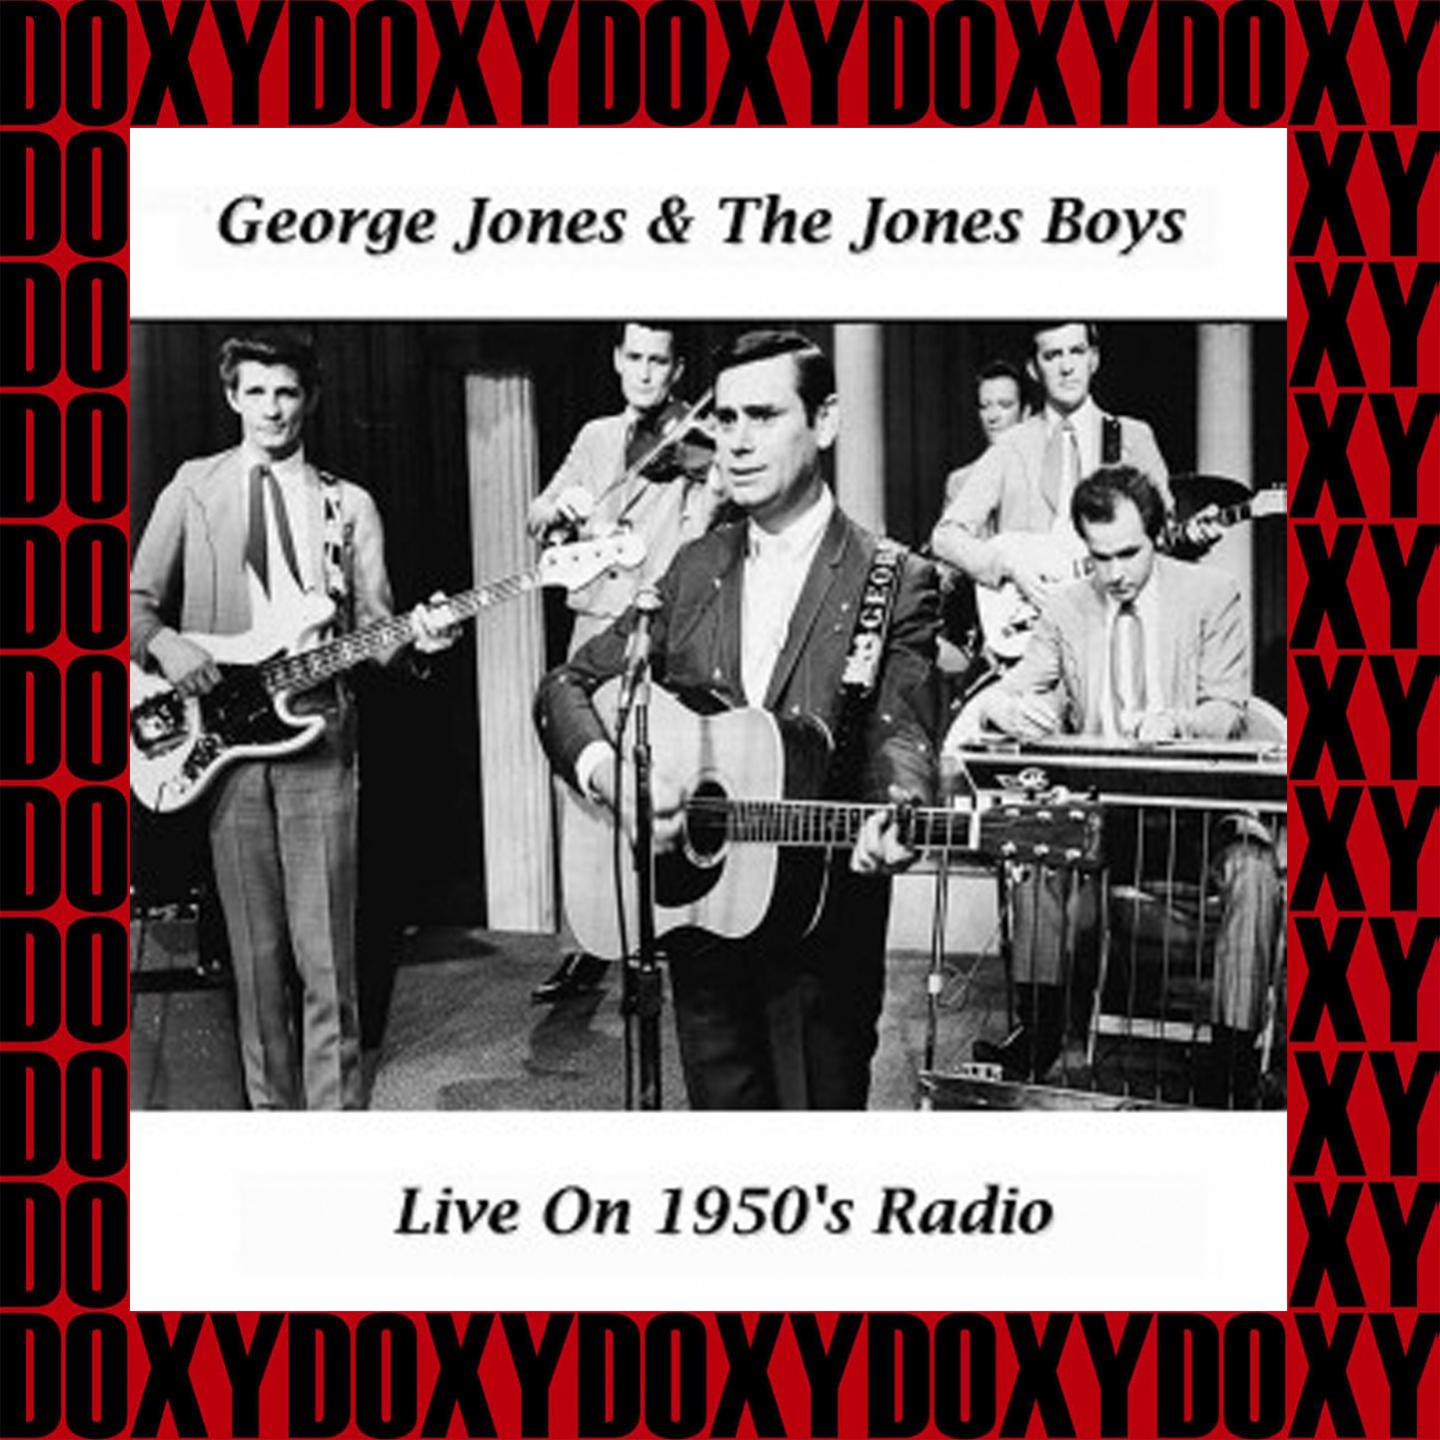 Live On 1950's Radio (Remastered Version) (Doxy Collection)